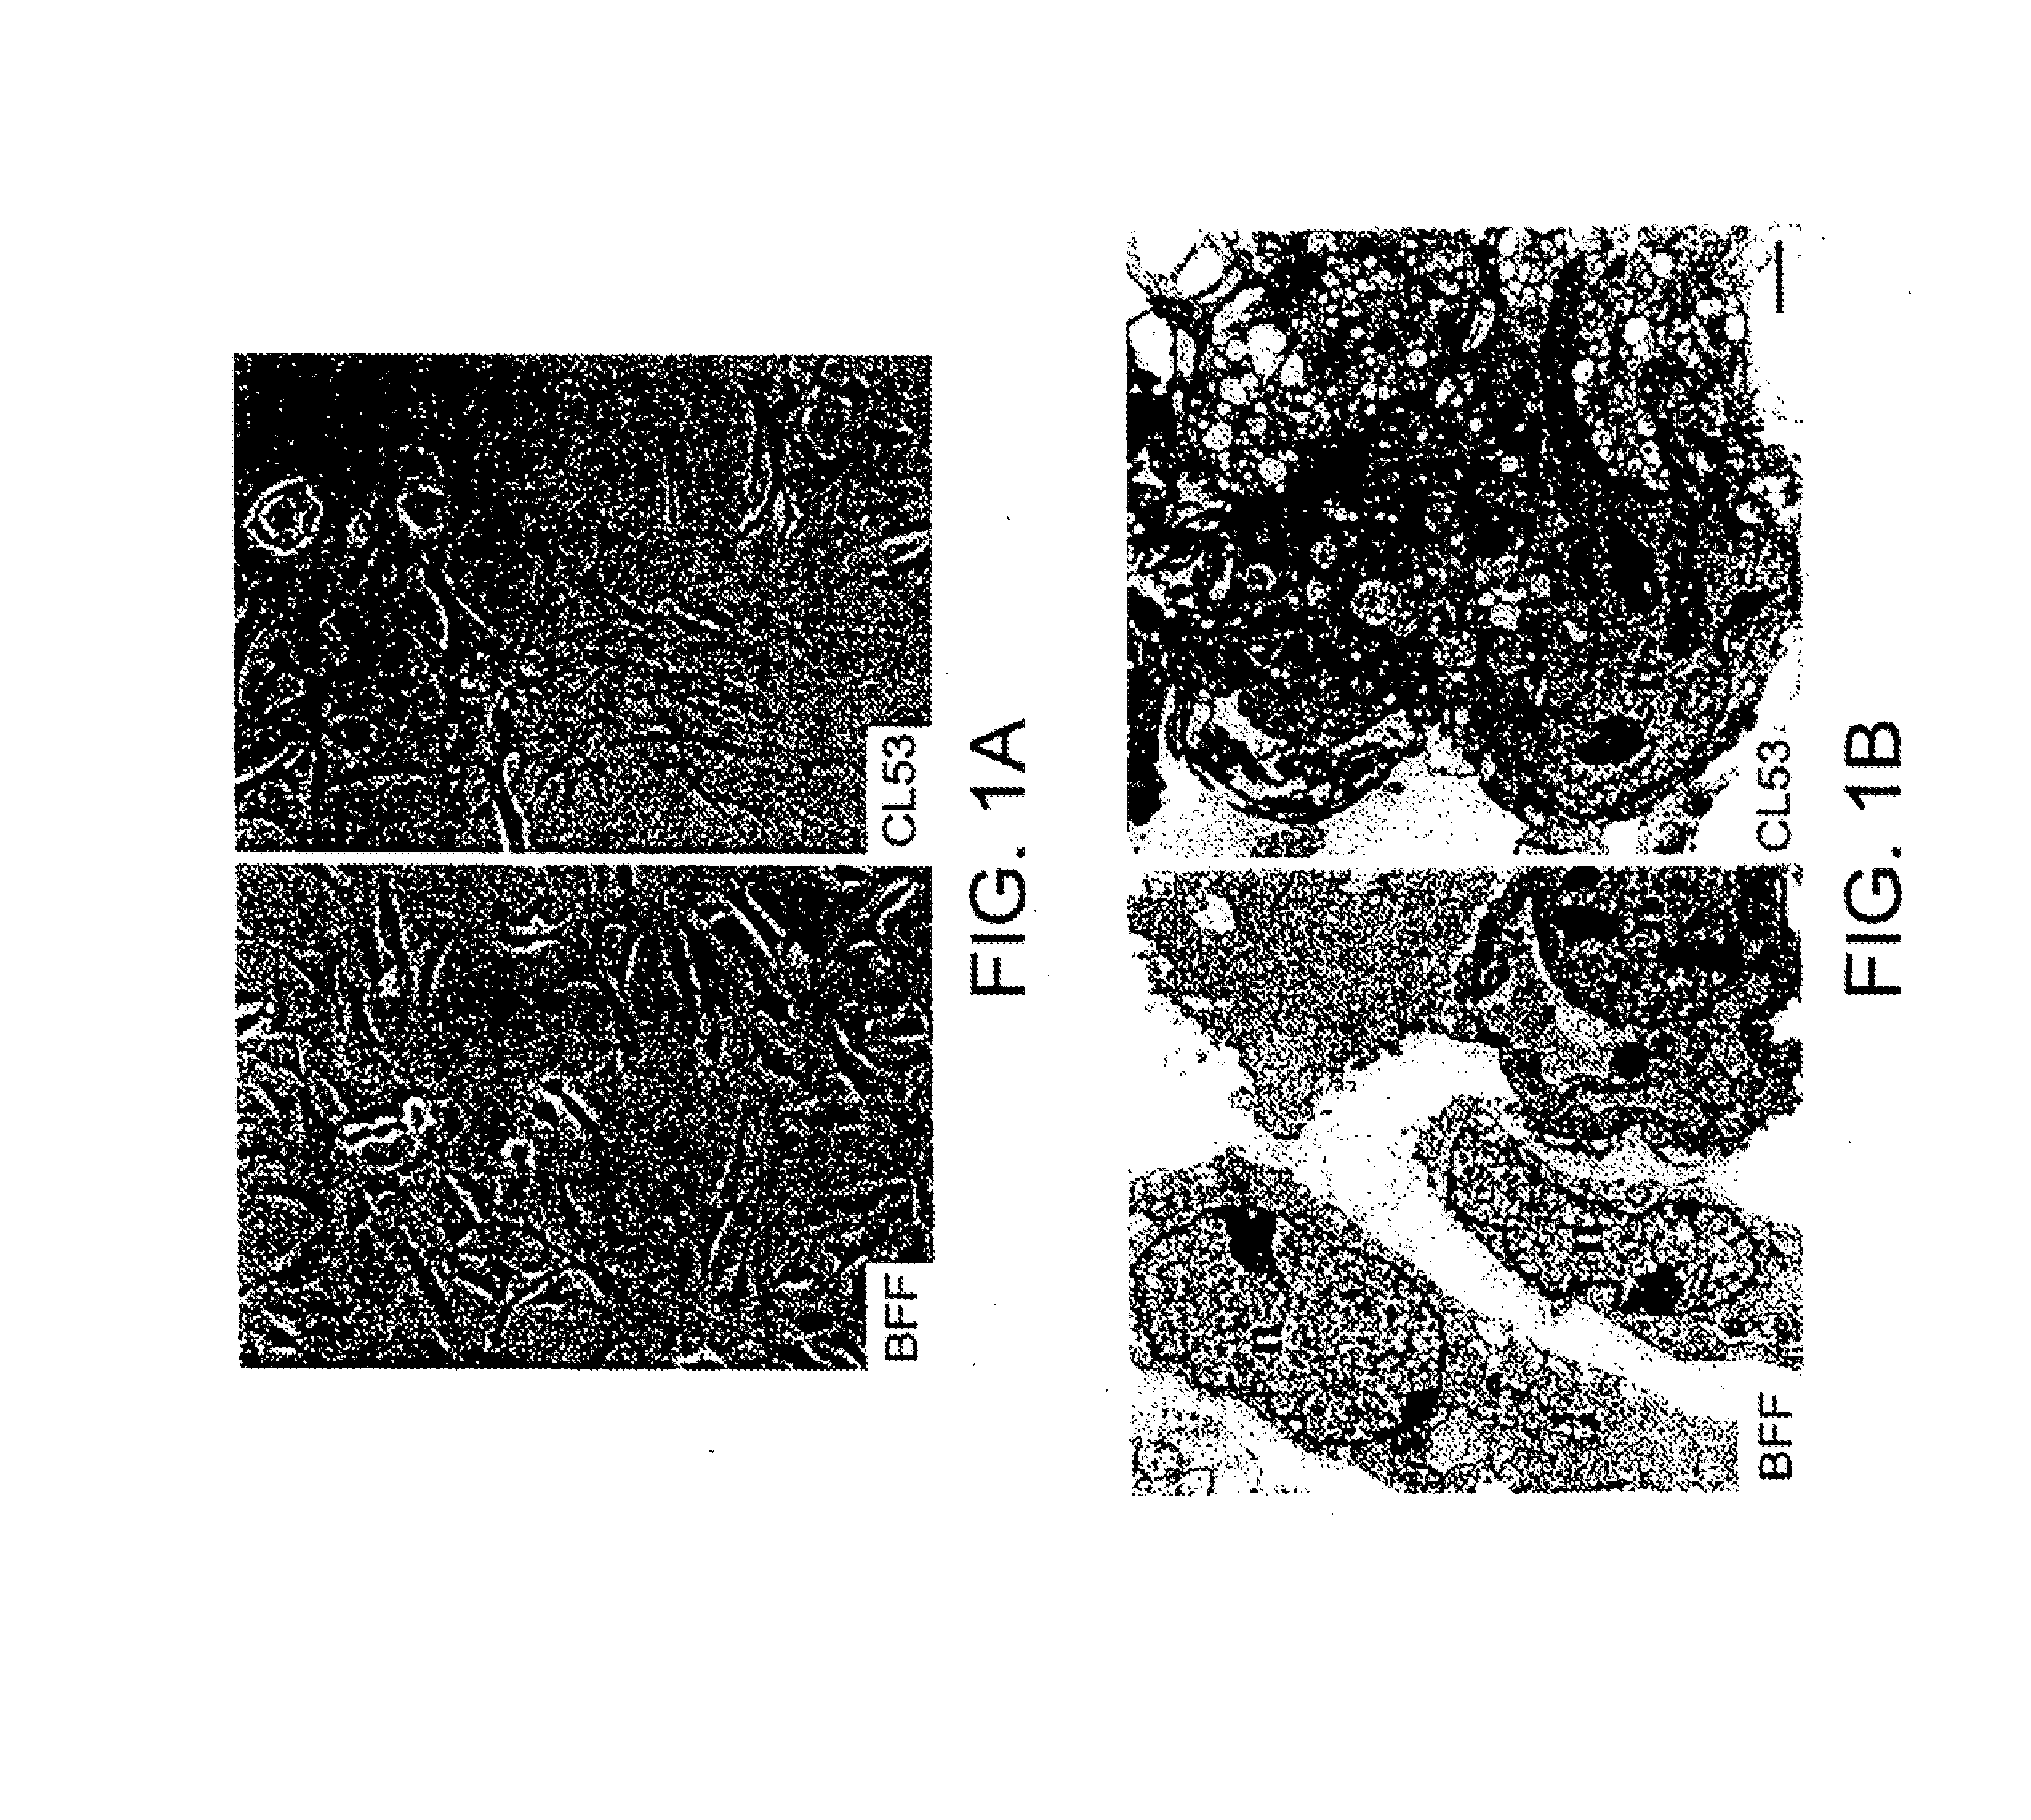 Methods of repairing tandemly repeated DNA sequences and extending cell life-span using nuclear transfer